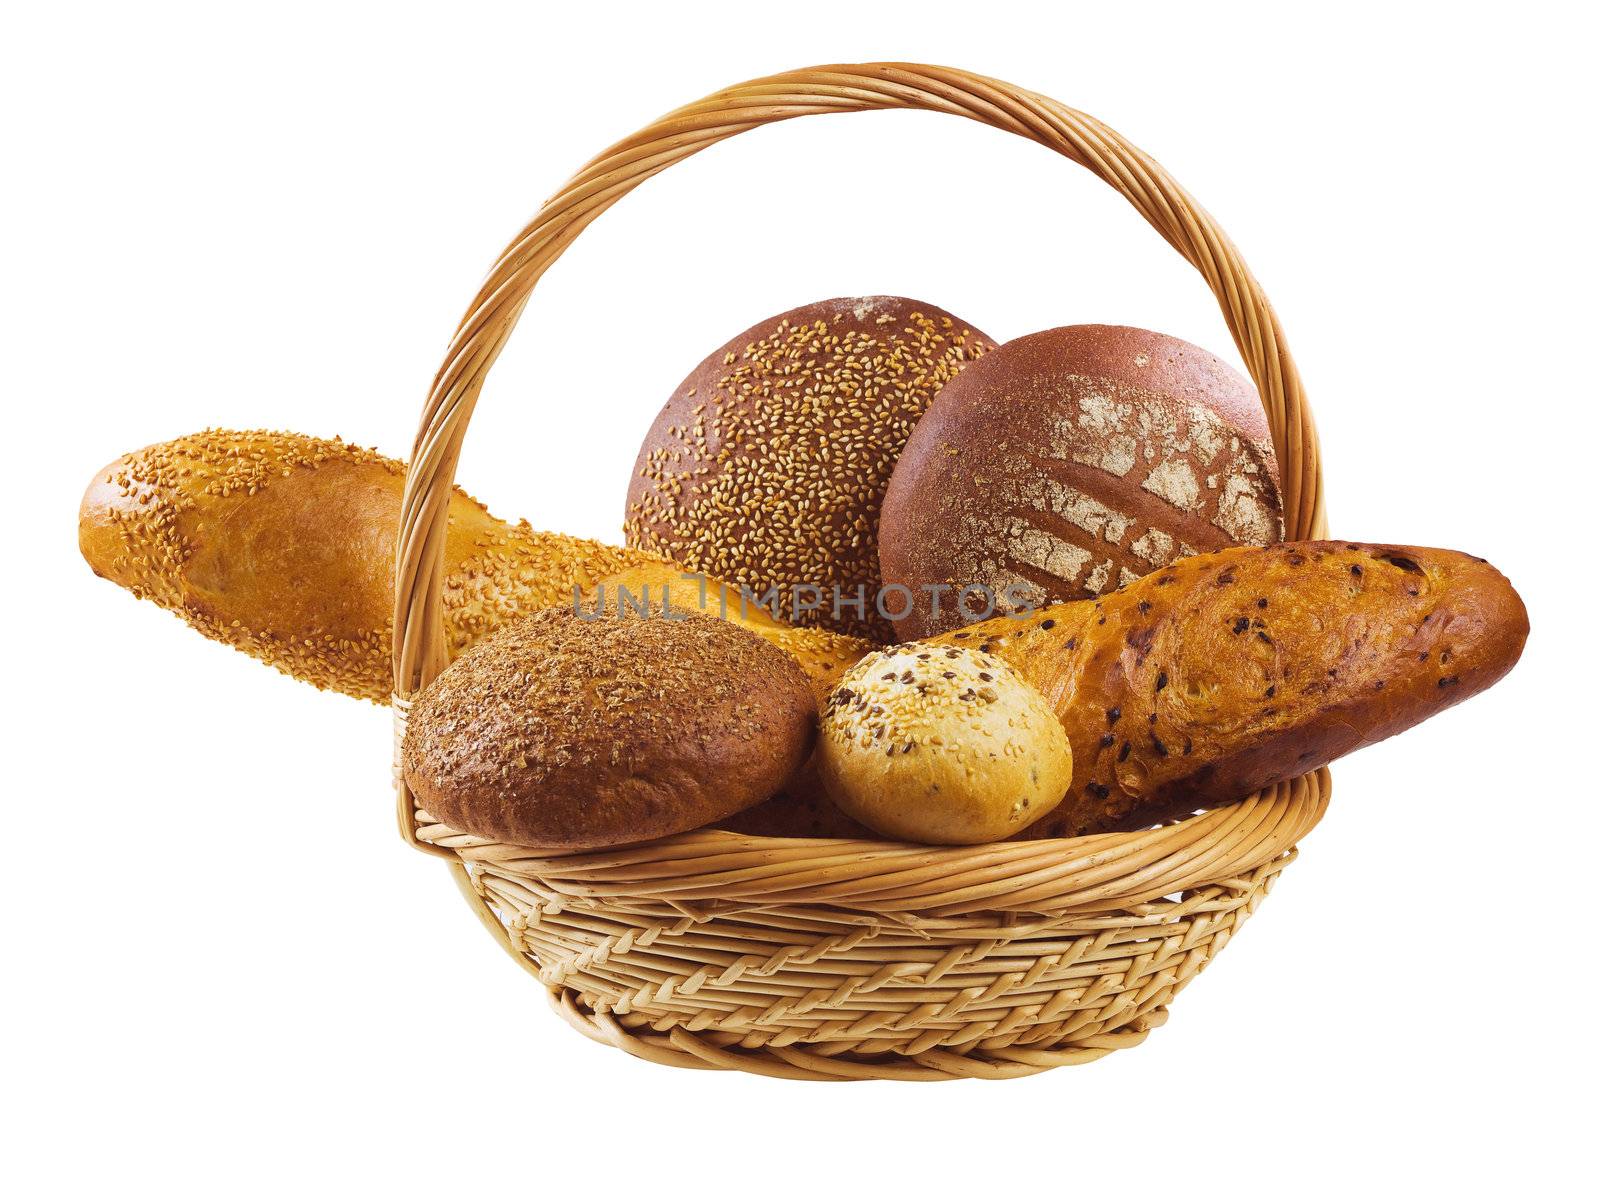 Basket of bread isolated on white background